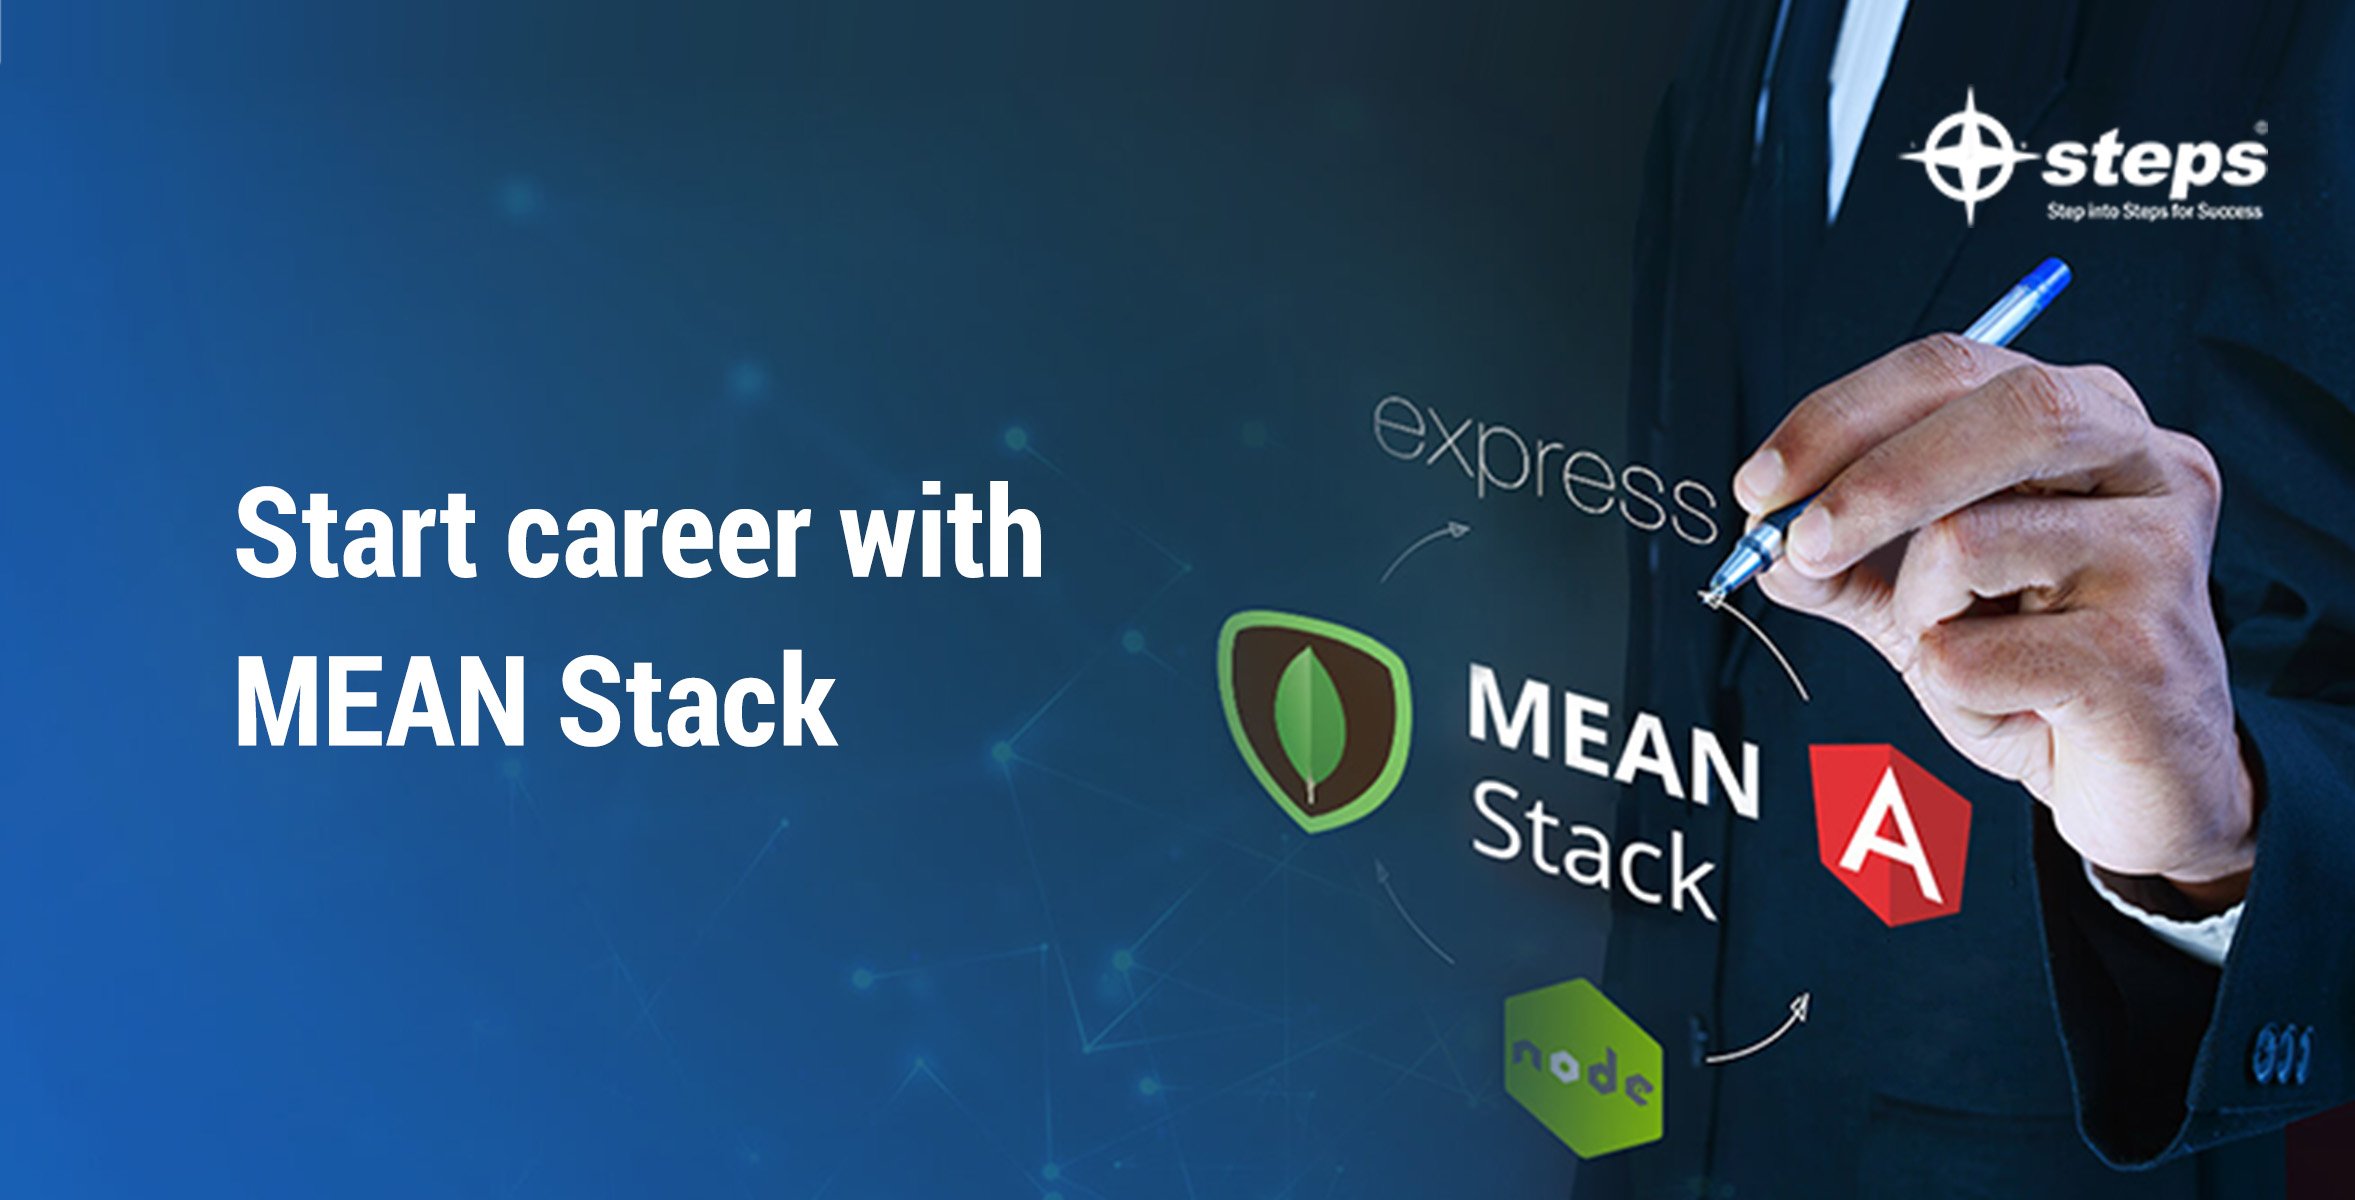 Start career with MEAN STACK